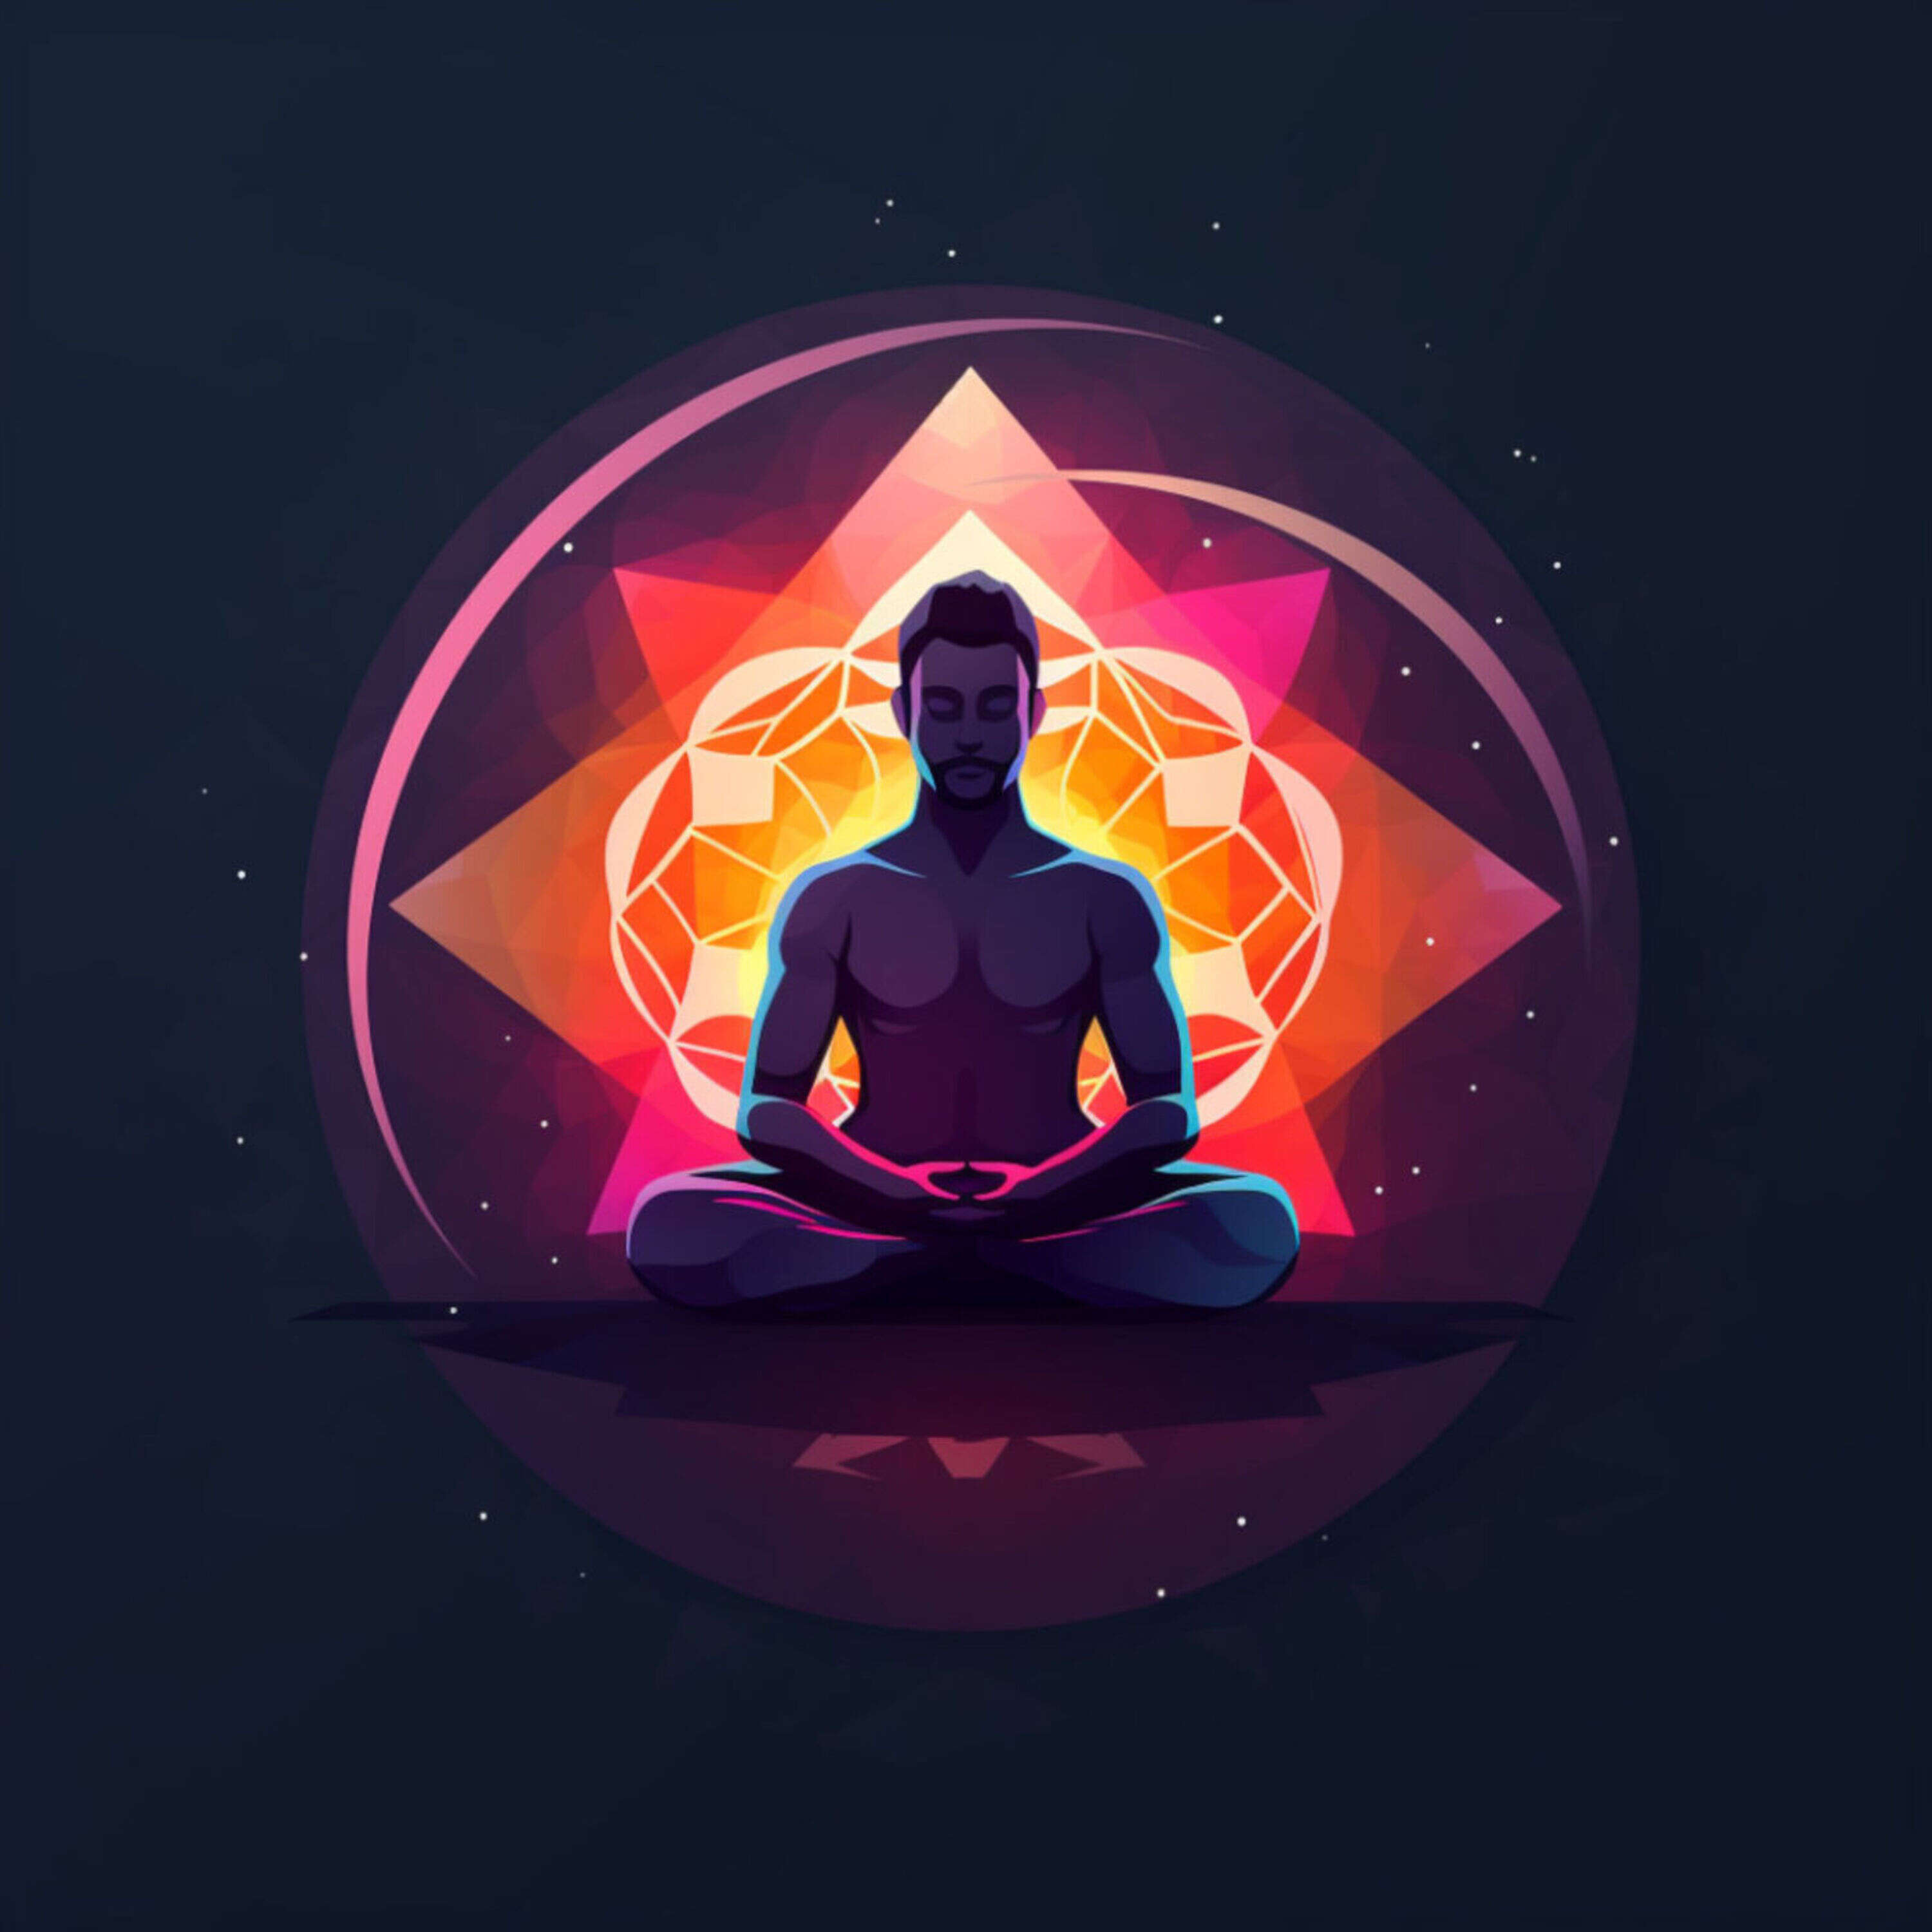 Meditation sounds: Soothing Sounds for Relaxation